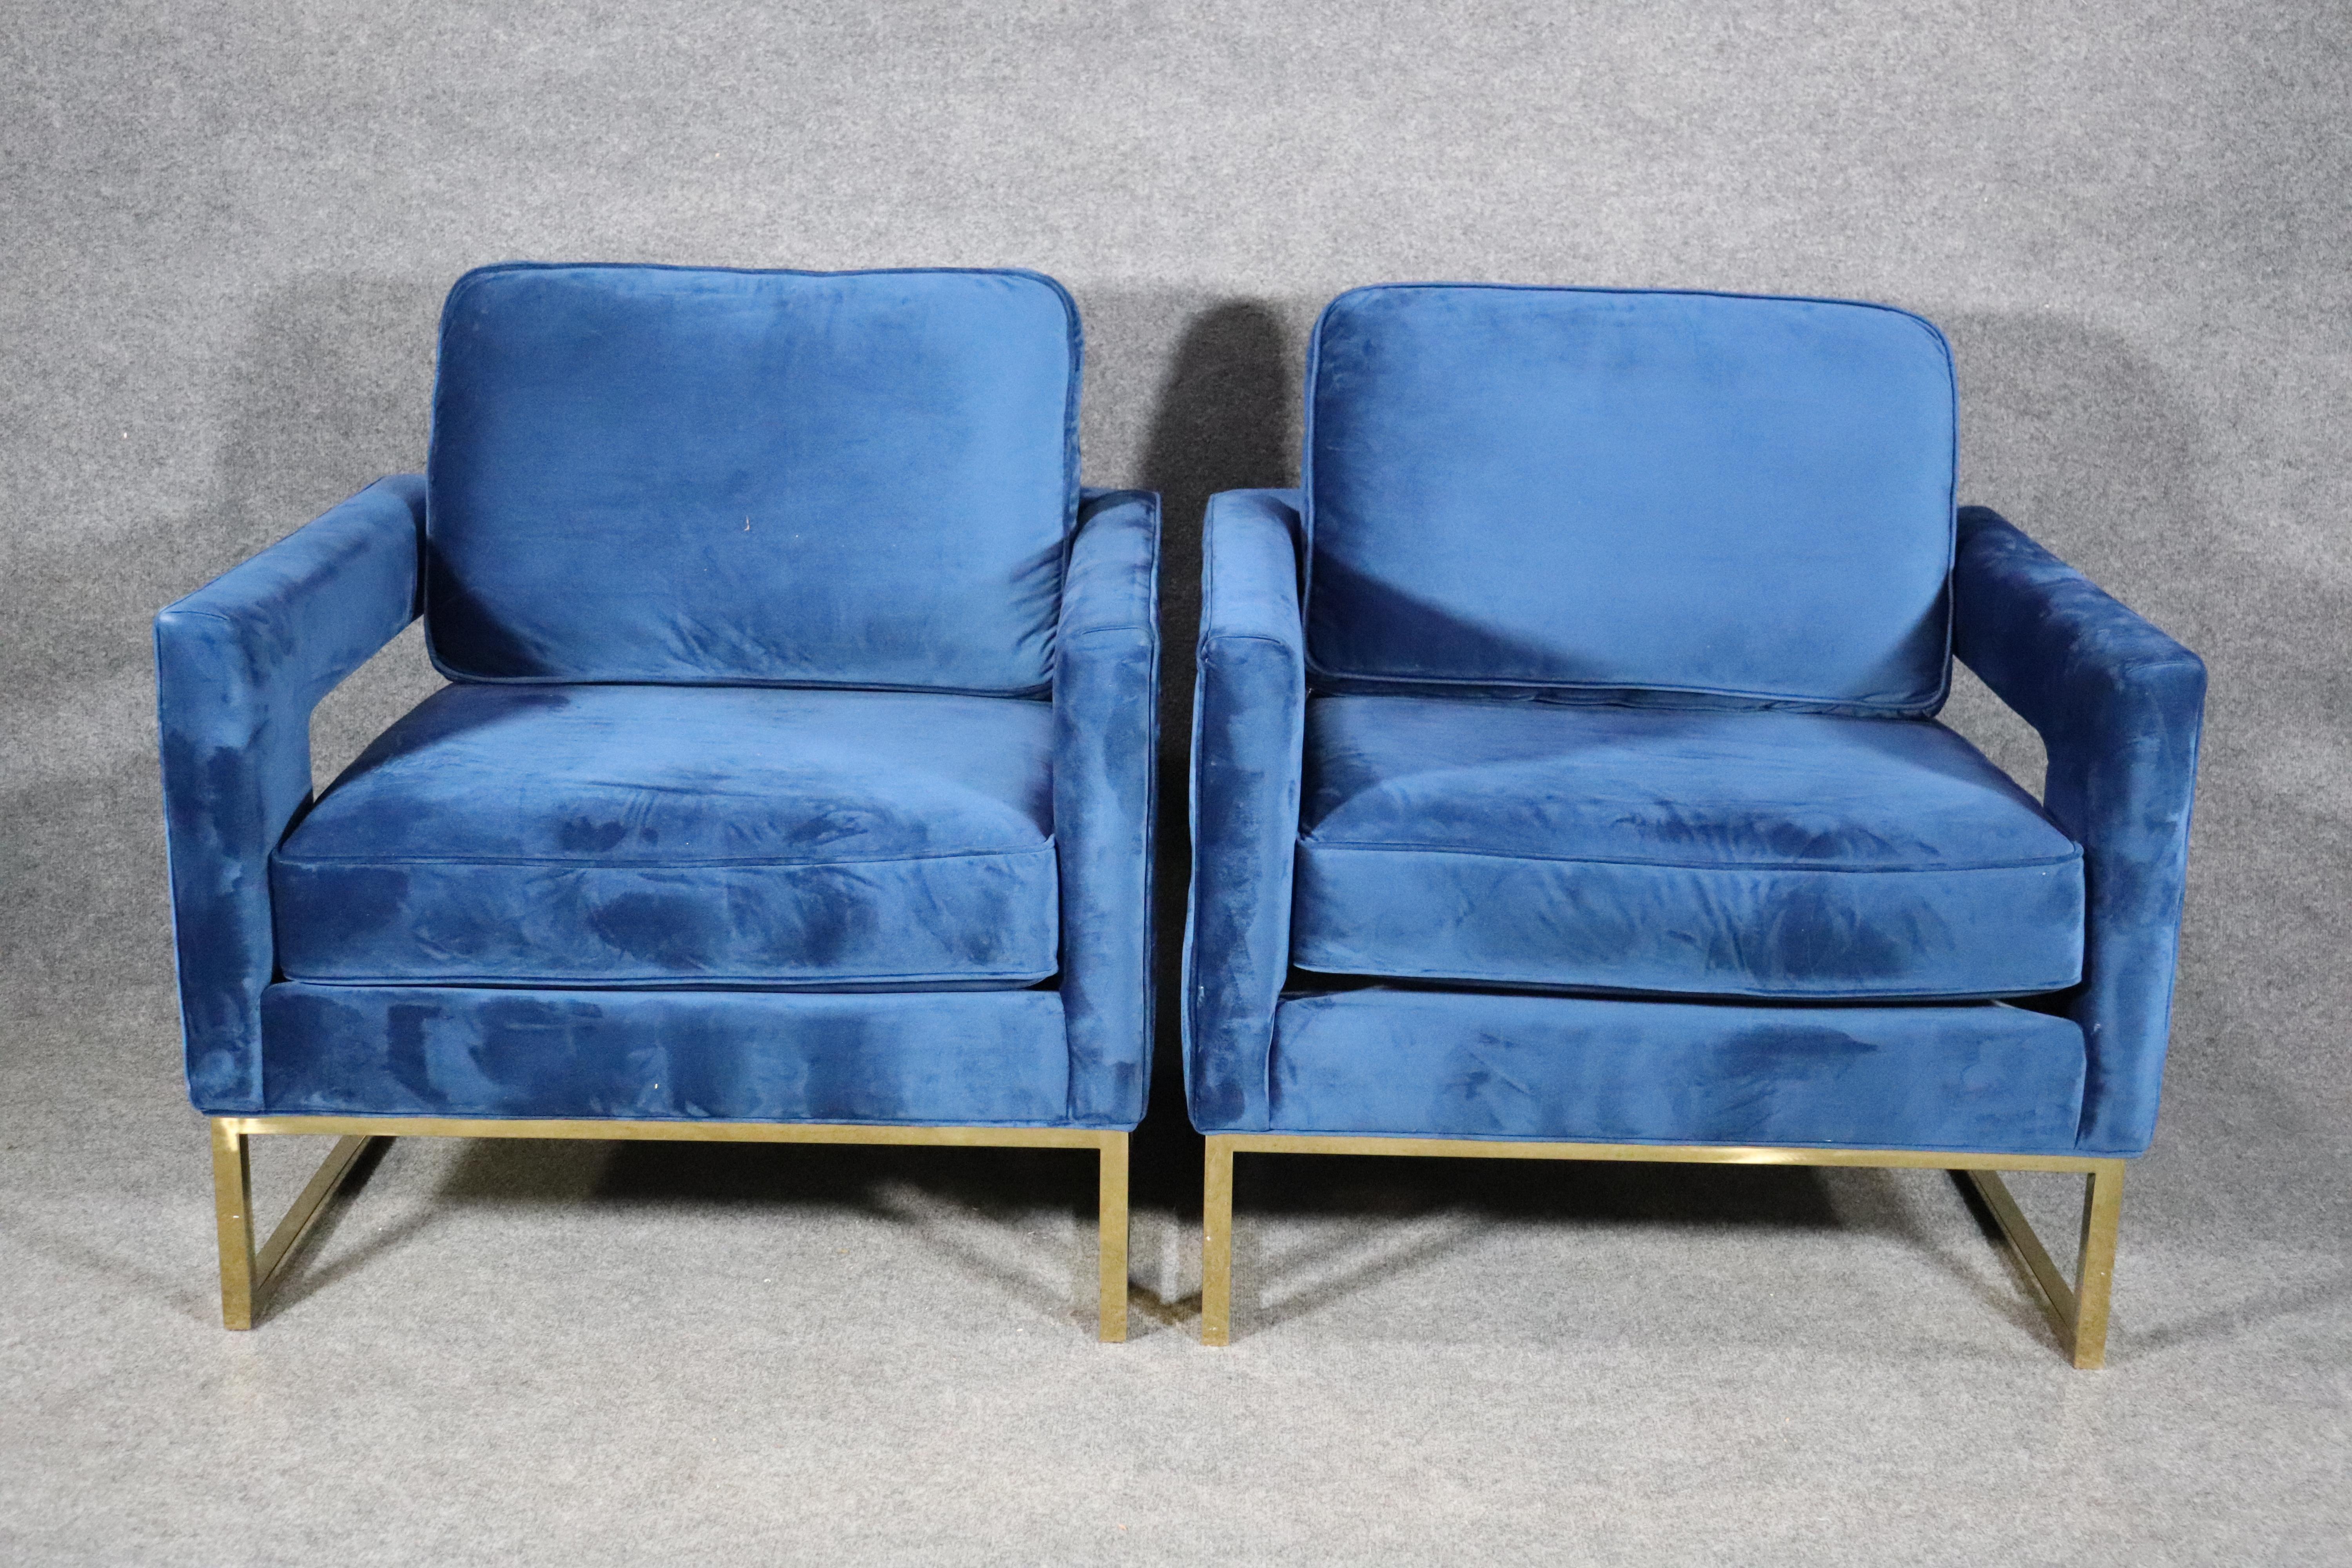 Mid-Century Modern style club chairs with polished bass base. Soft blue velvet wrapped chairs with cut out arms.
Please confirm location NY or NJ.